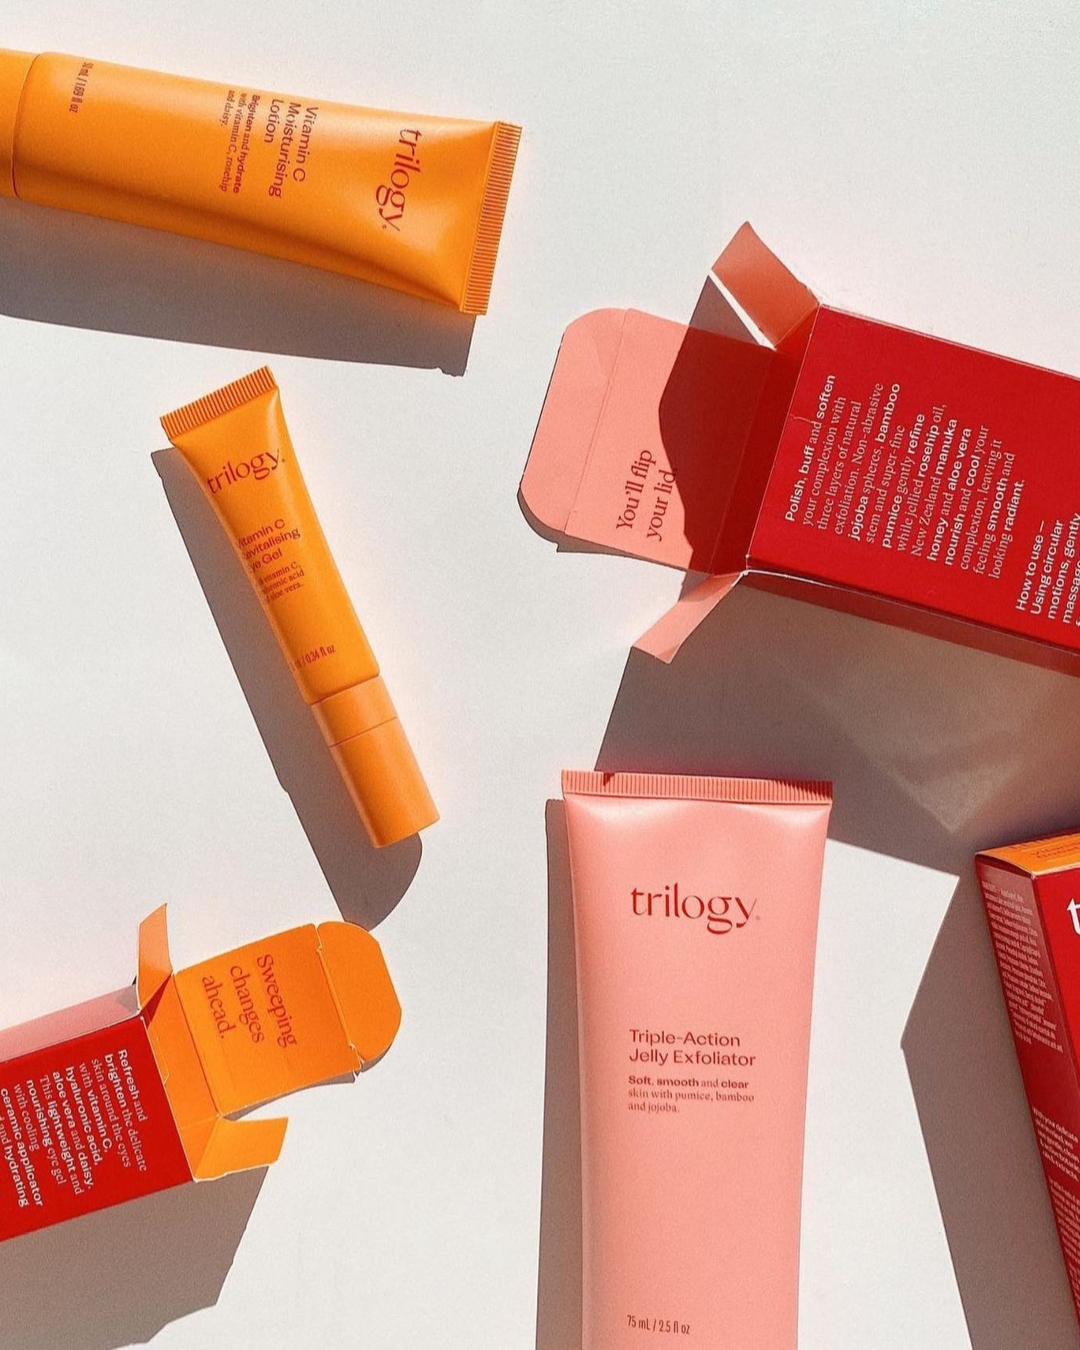 Orange and pink tubes of Trilogy skincare and red boxes artfully spread out on a white backdrop.